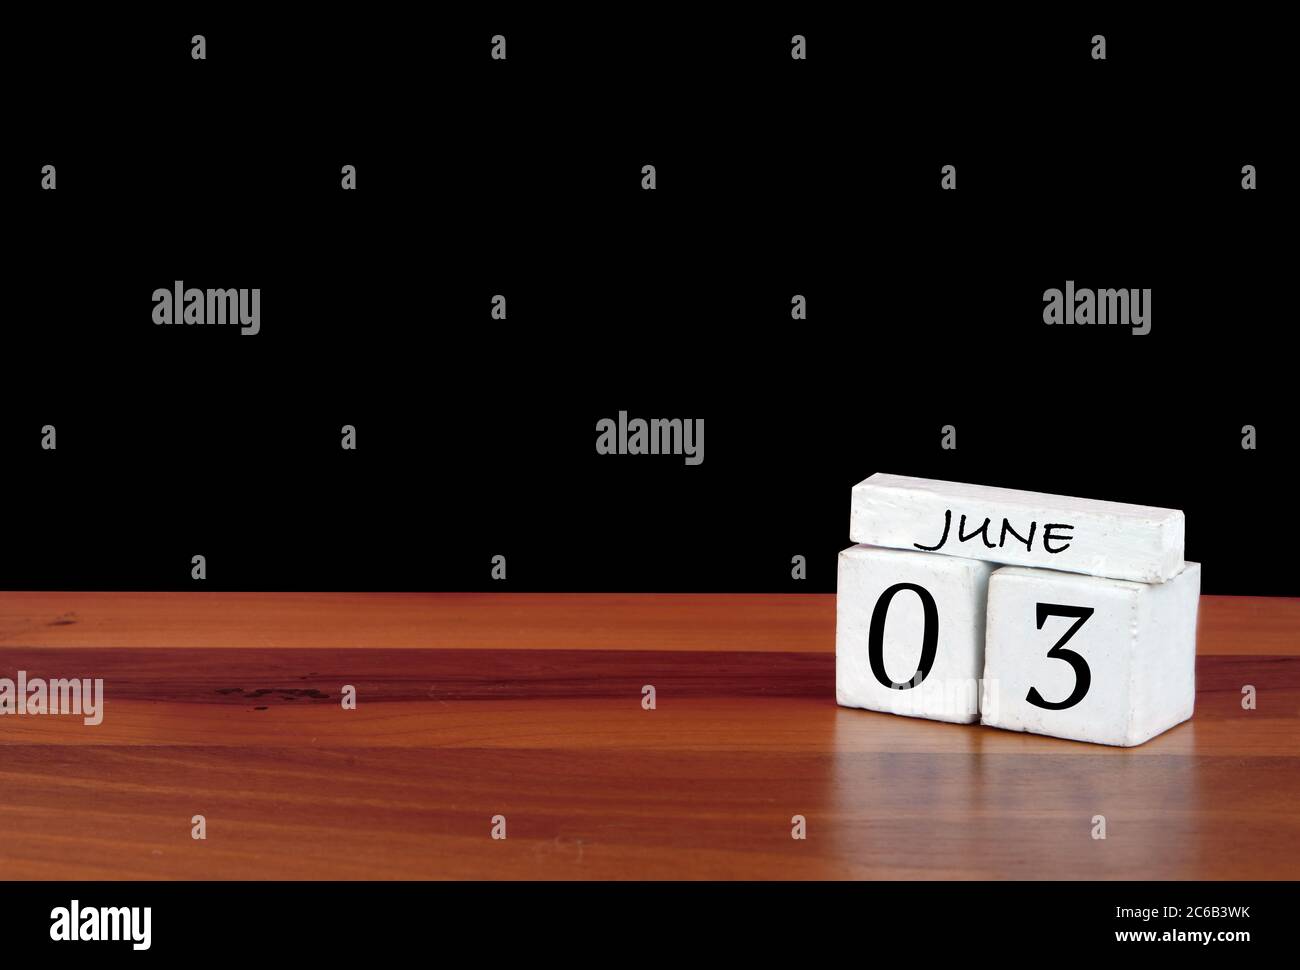 3 June calendar month. 3 days of the month. Reflected calendar on wooden floor with black background. Stock Photo